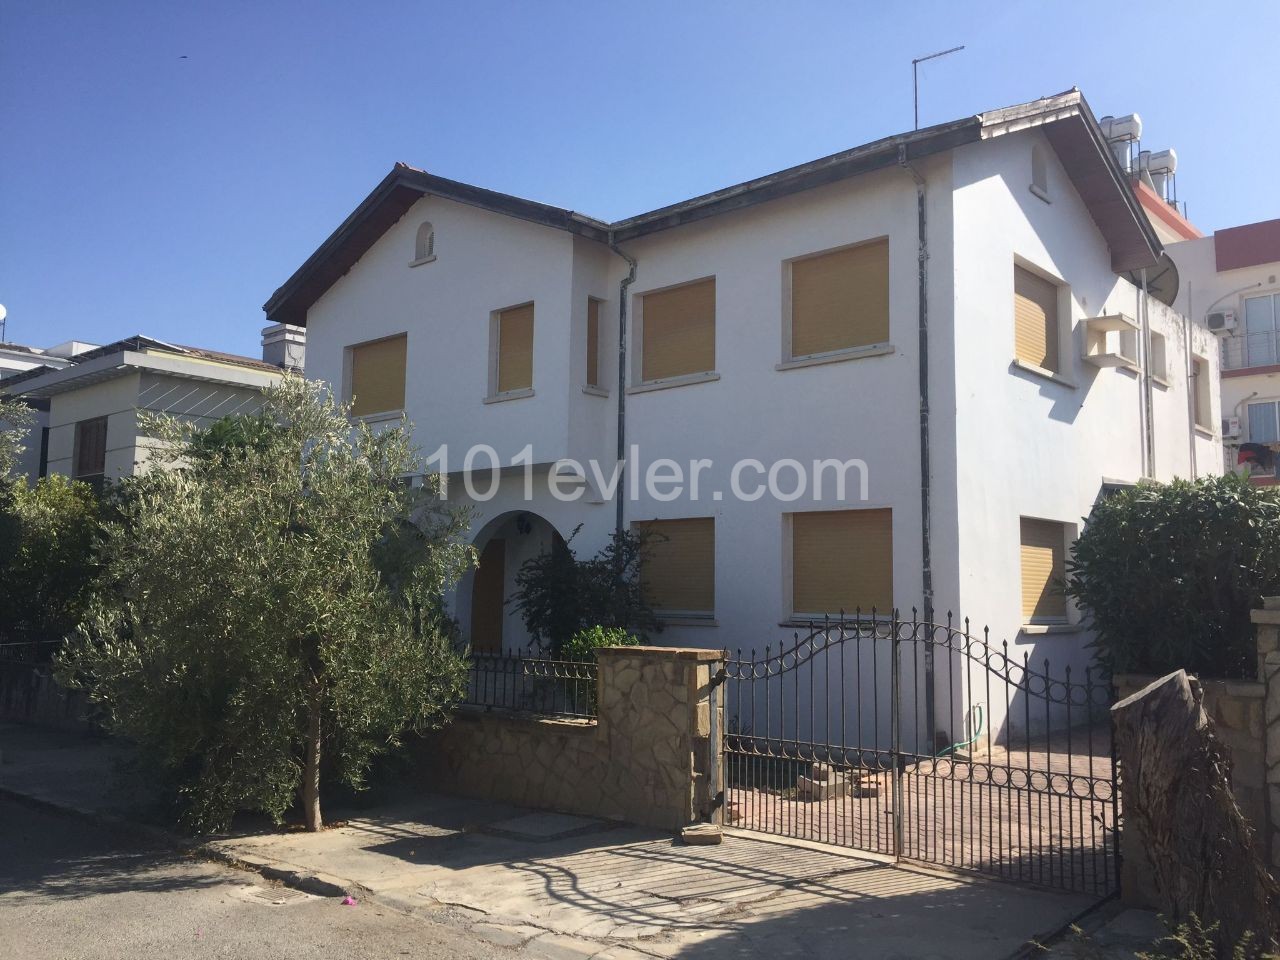 NICOSIA / YENIKENT 3+1 DETACHED HOUSE WITH POOL FOR SALE IN TURKEY 350M2 250,000 STG ** 